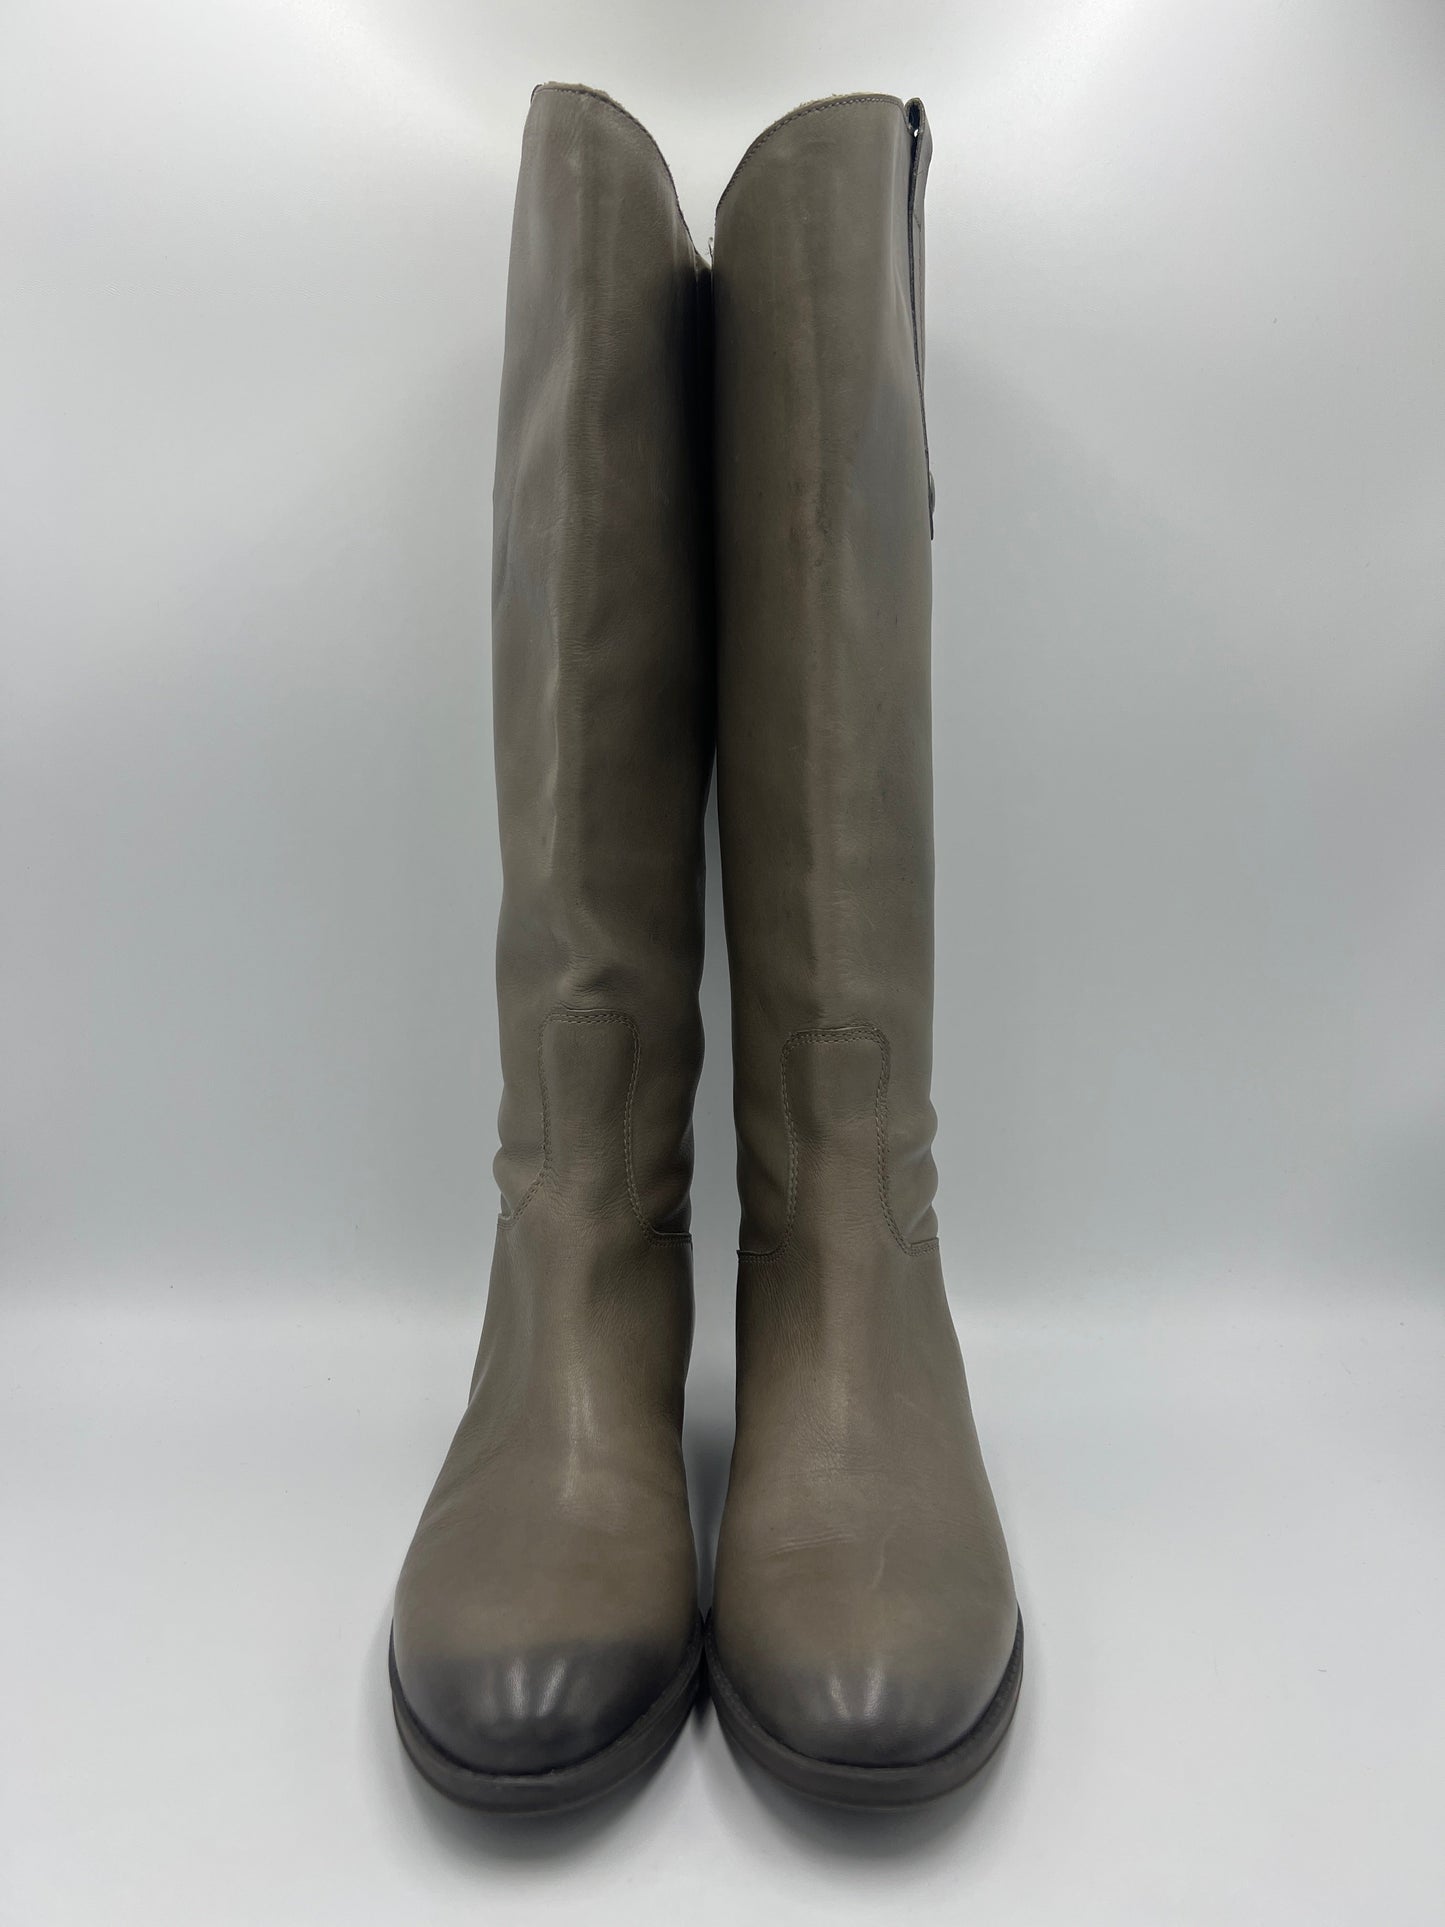 Boots Knee Flats By Sam Edelman  Size: 6.5